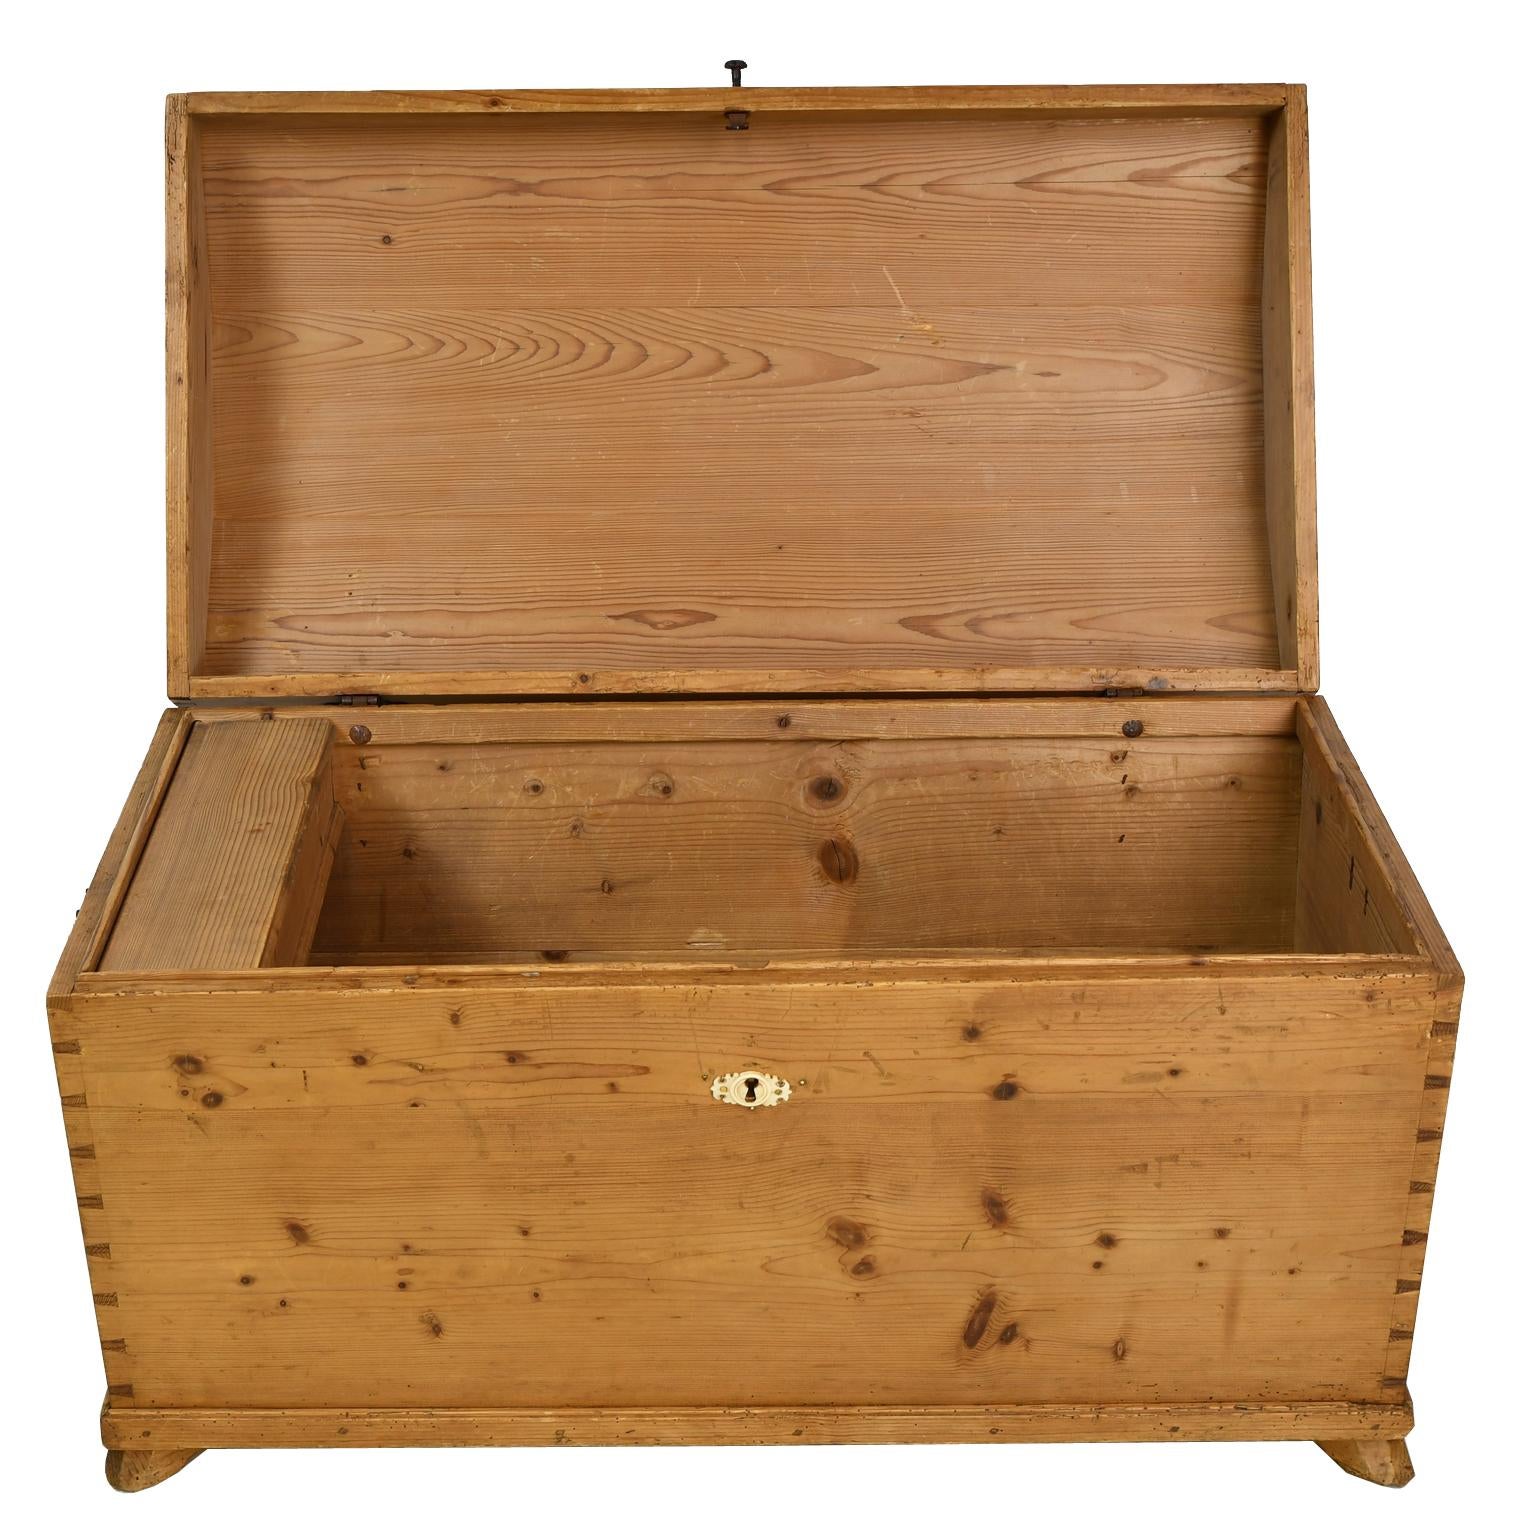 A lovely chest in pine with hinged dome-top over a tapered rectangular case with dove-tailed corners and resting on carved slipper feet. Interior offers a small lidded compartment that was used for the storage of gloves and other accoutrements.